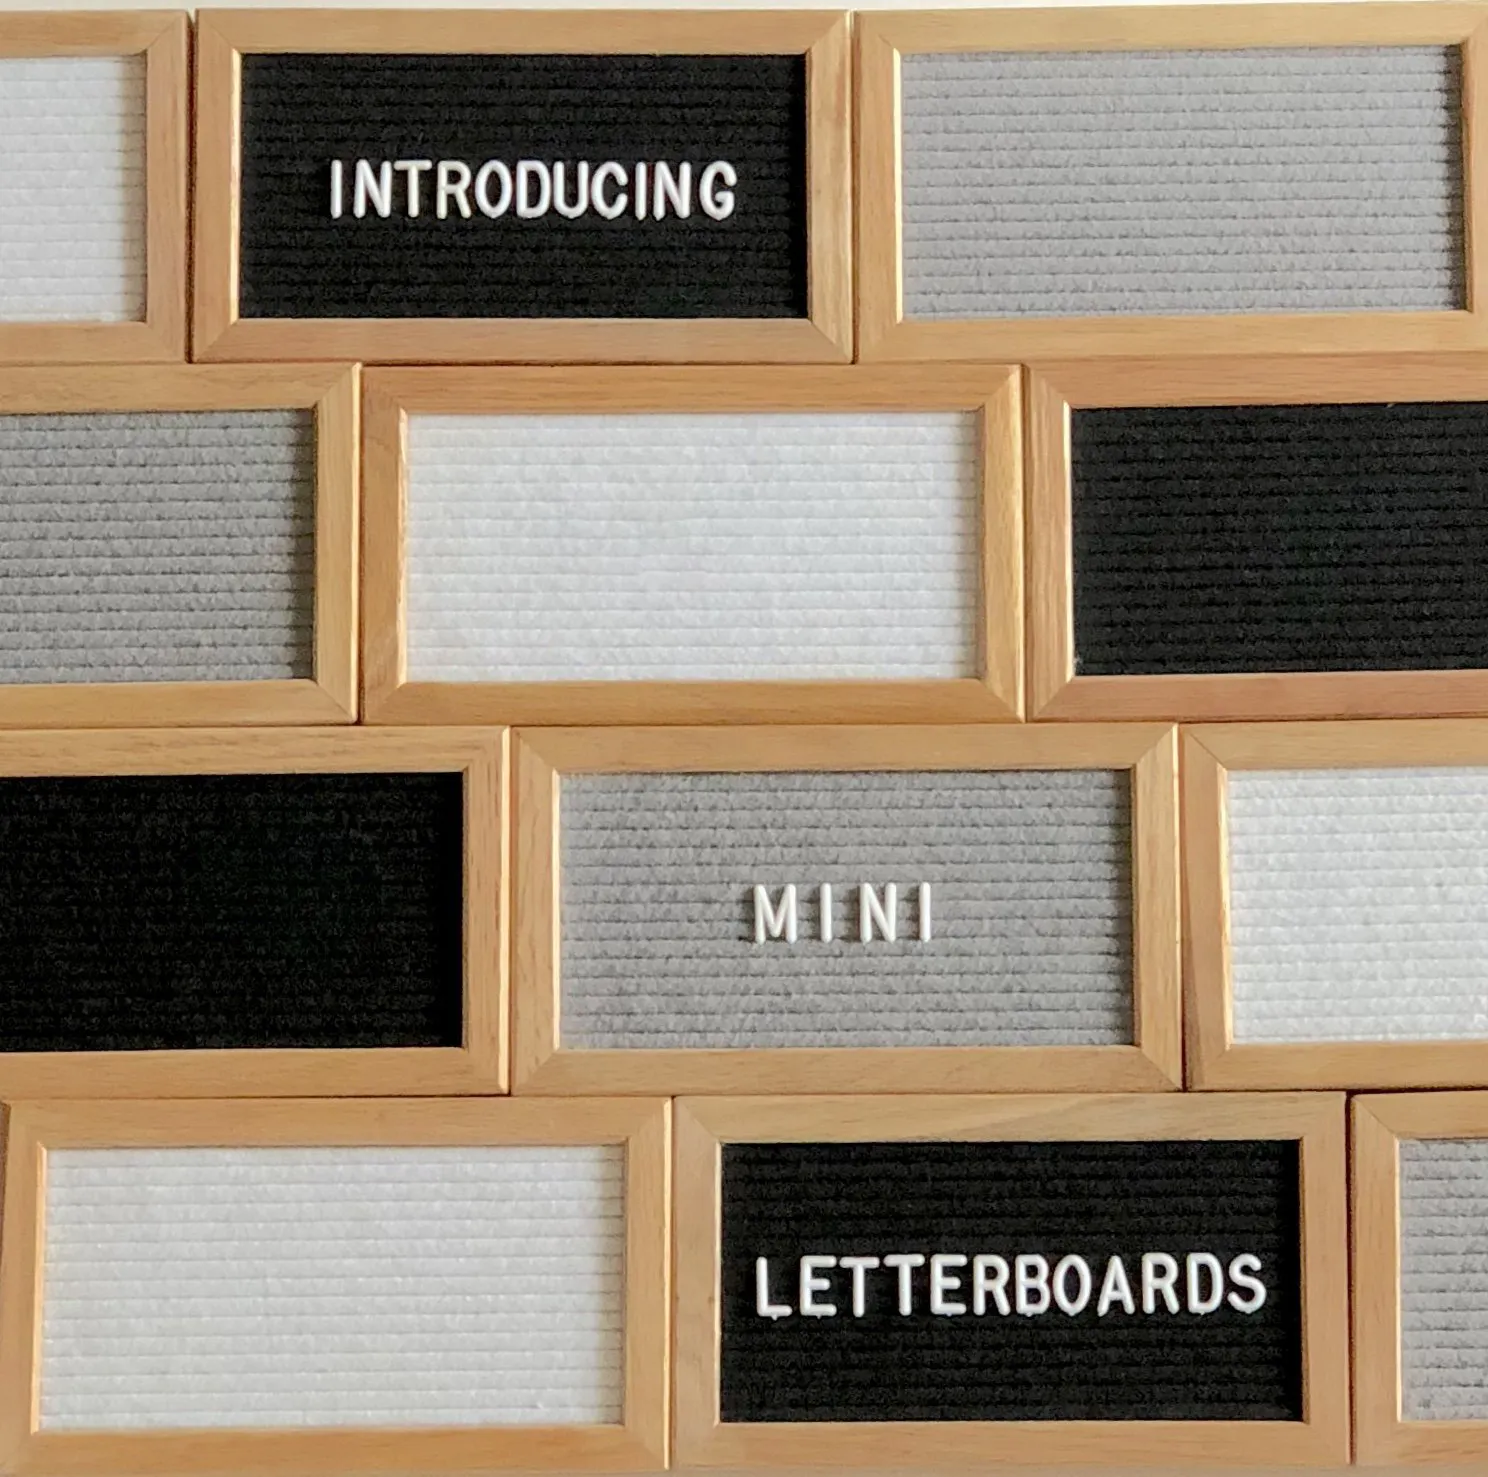 Small Felt Letter Board Message Board Wood Frame Changeable Letter Board with Numbers Letters Characters